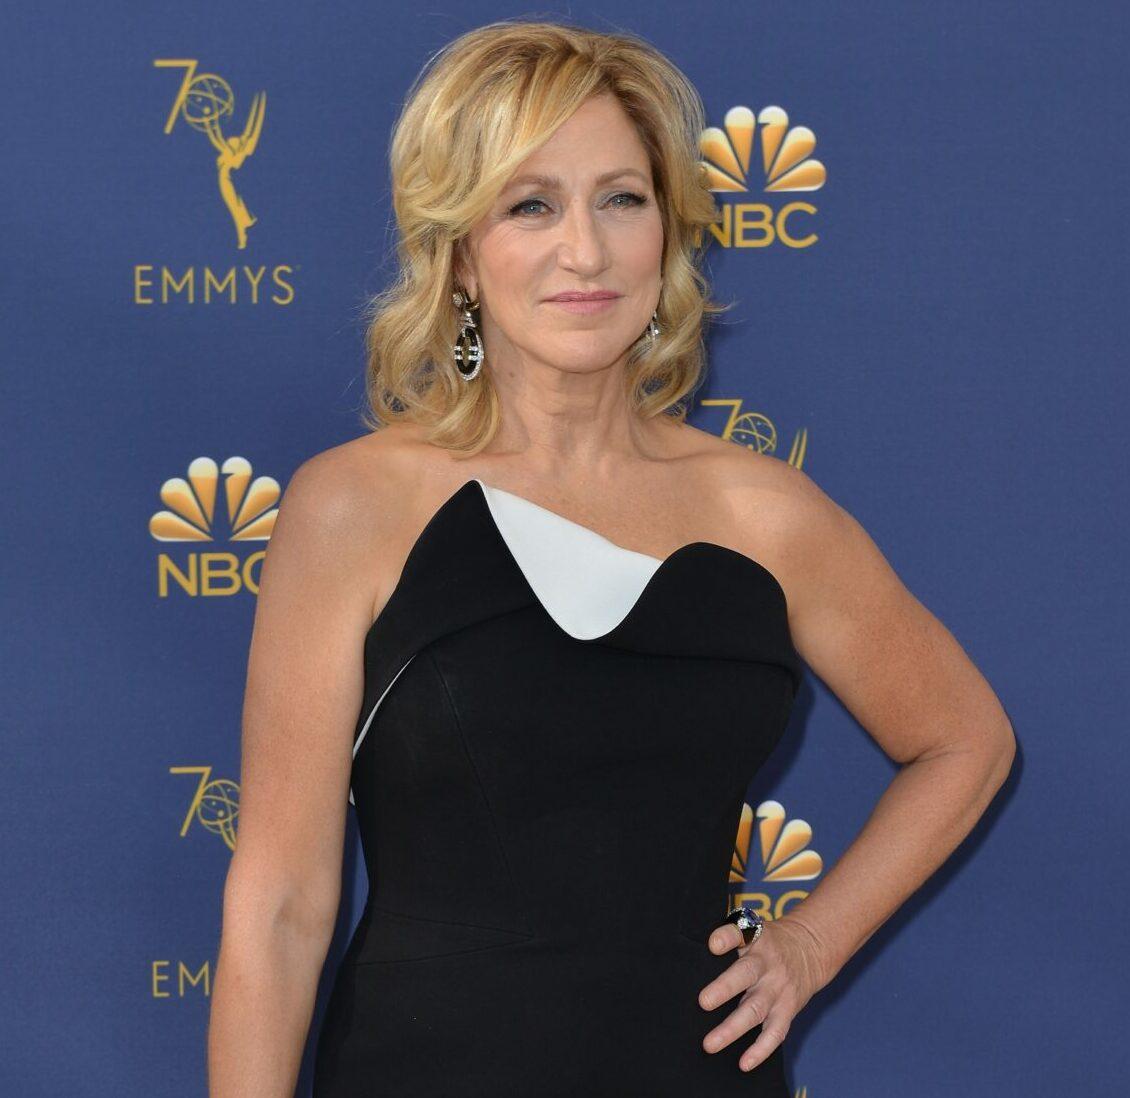 Actor Edie Falco attends the 70th annual Primetime Emmy Award at the Microsoft Theater in downtown Los Angeles on September 17, 2018.